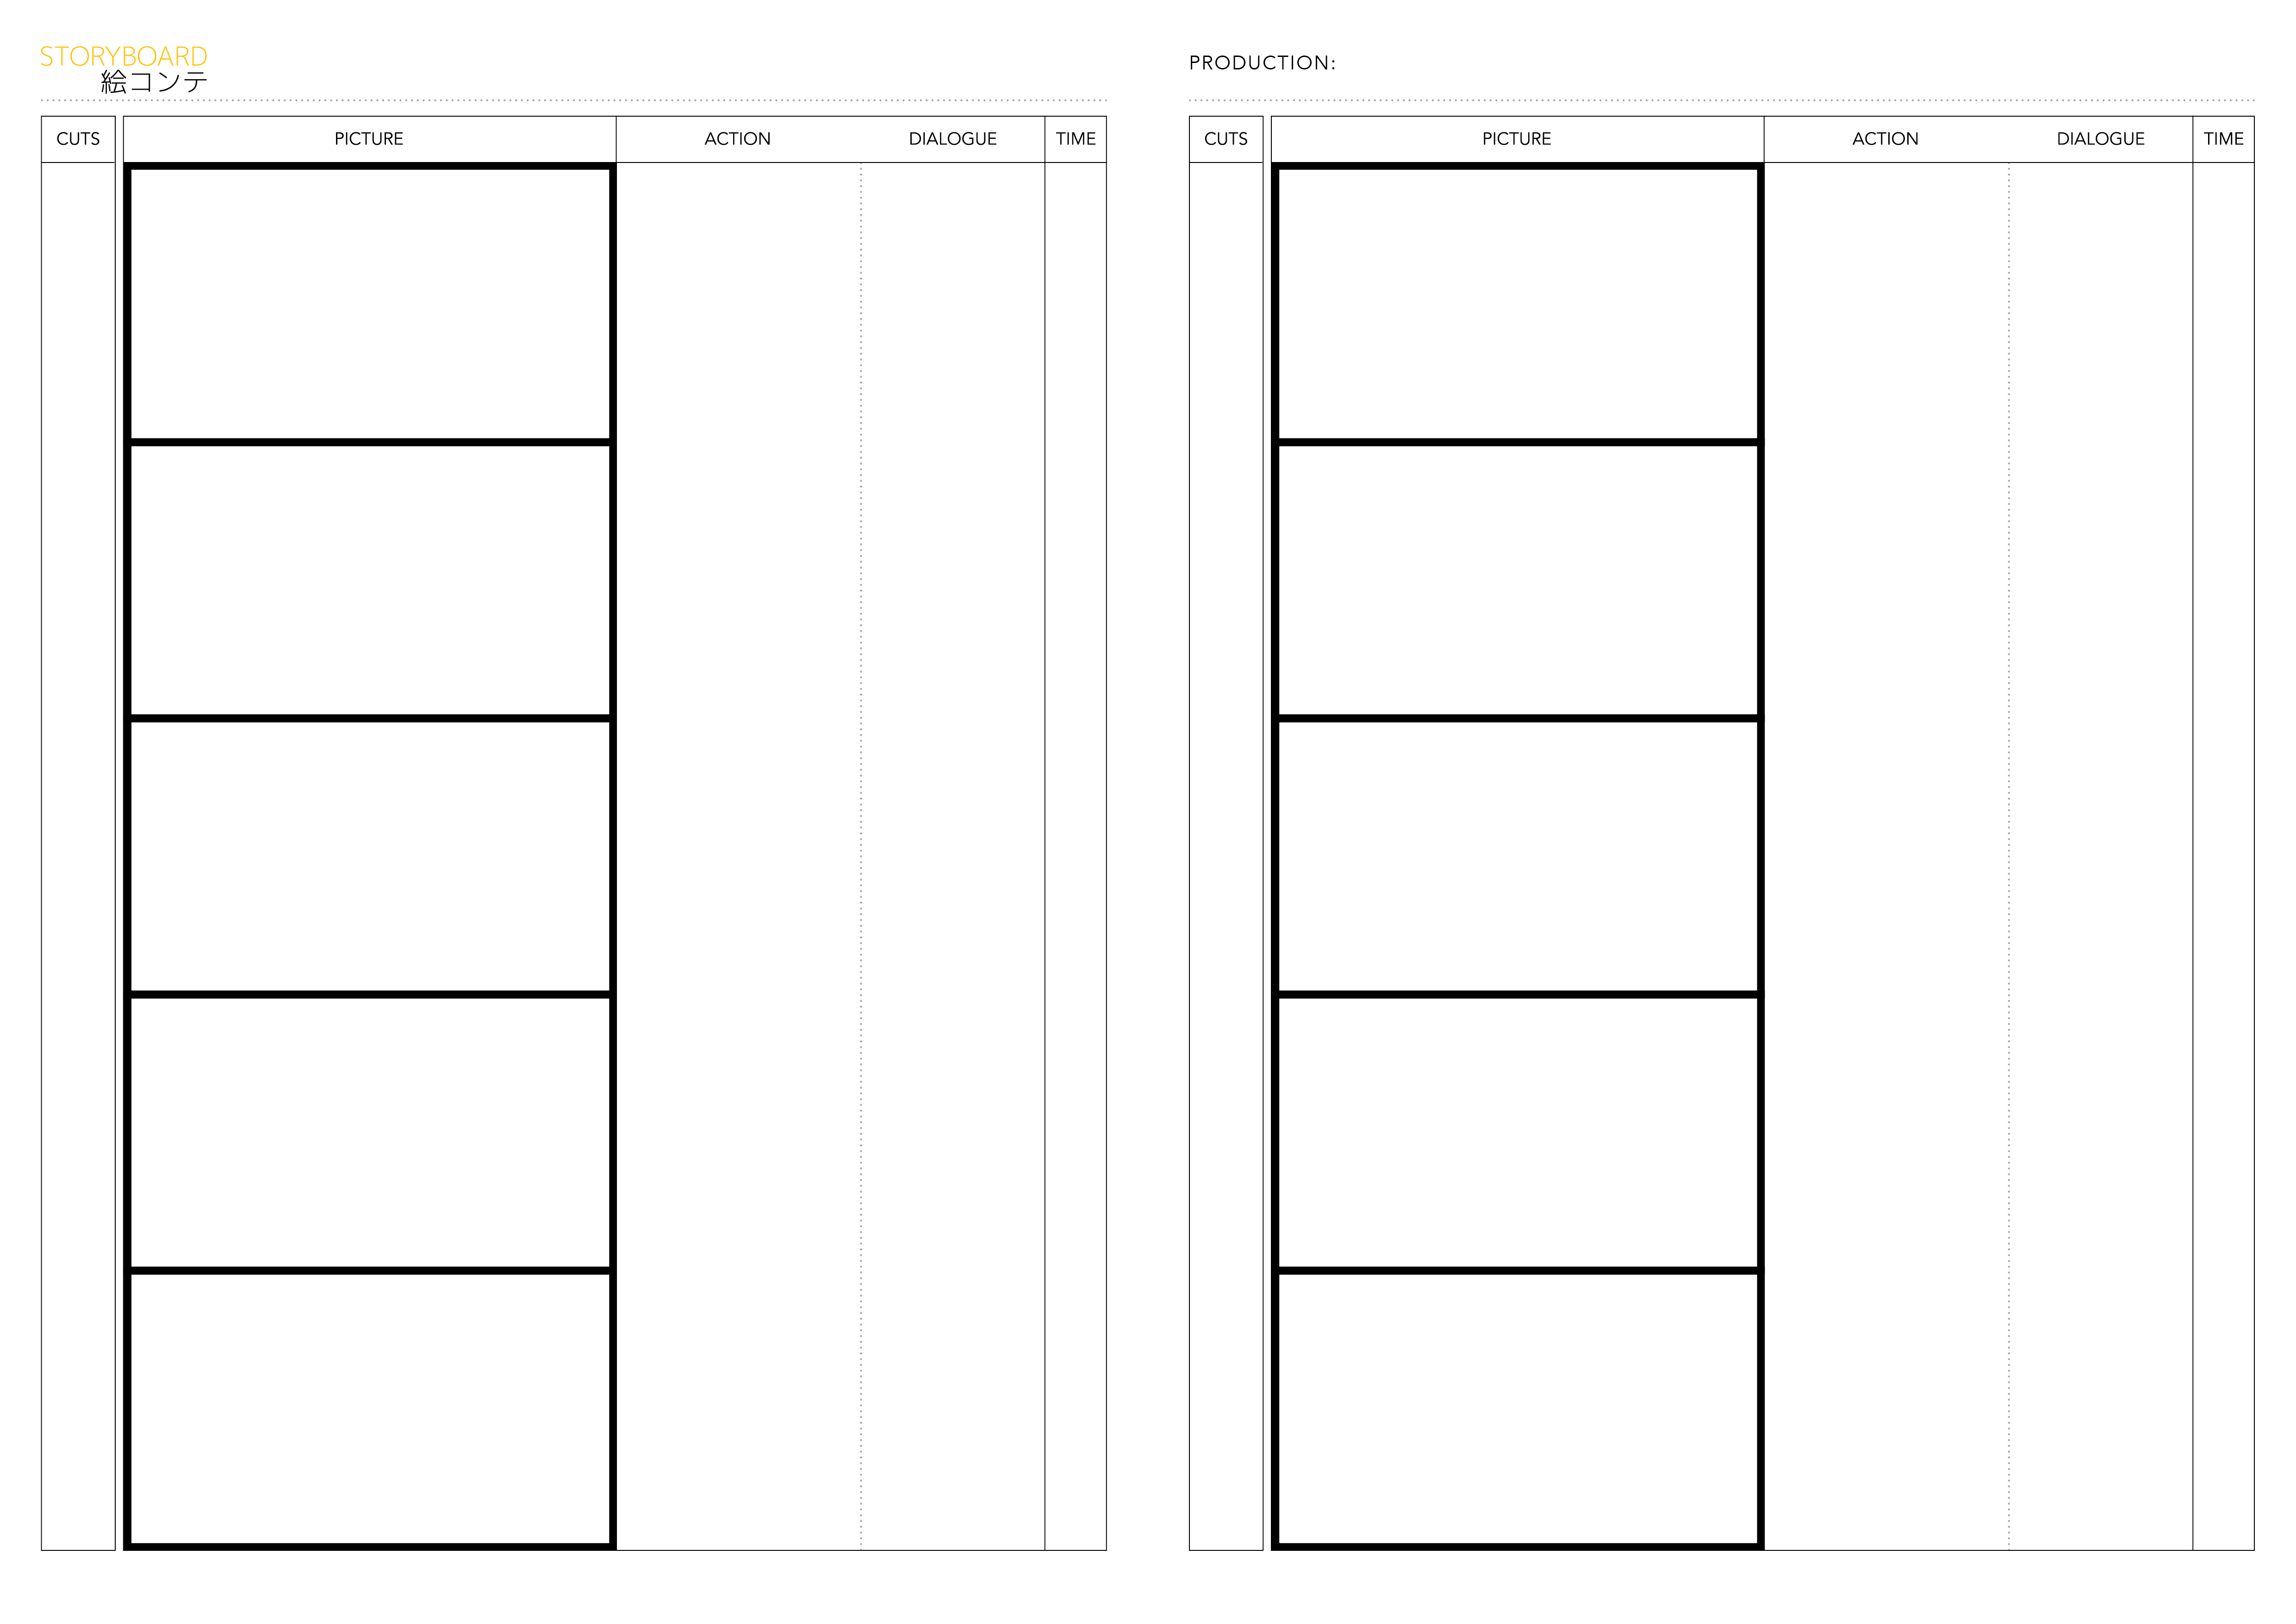 2 free anime storyboard templates for 16:9 films | Templates Supply